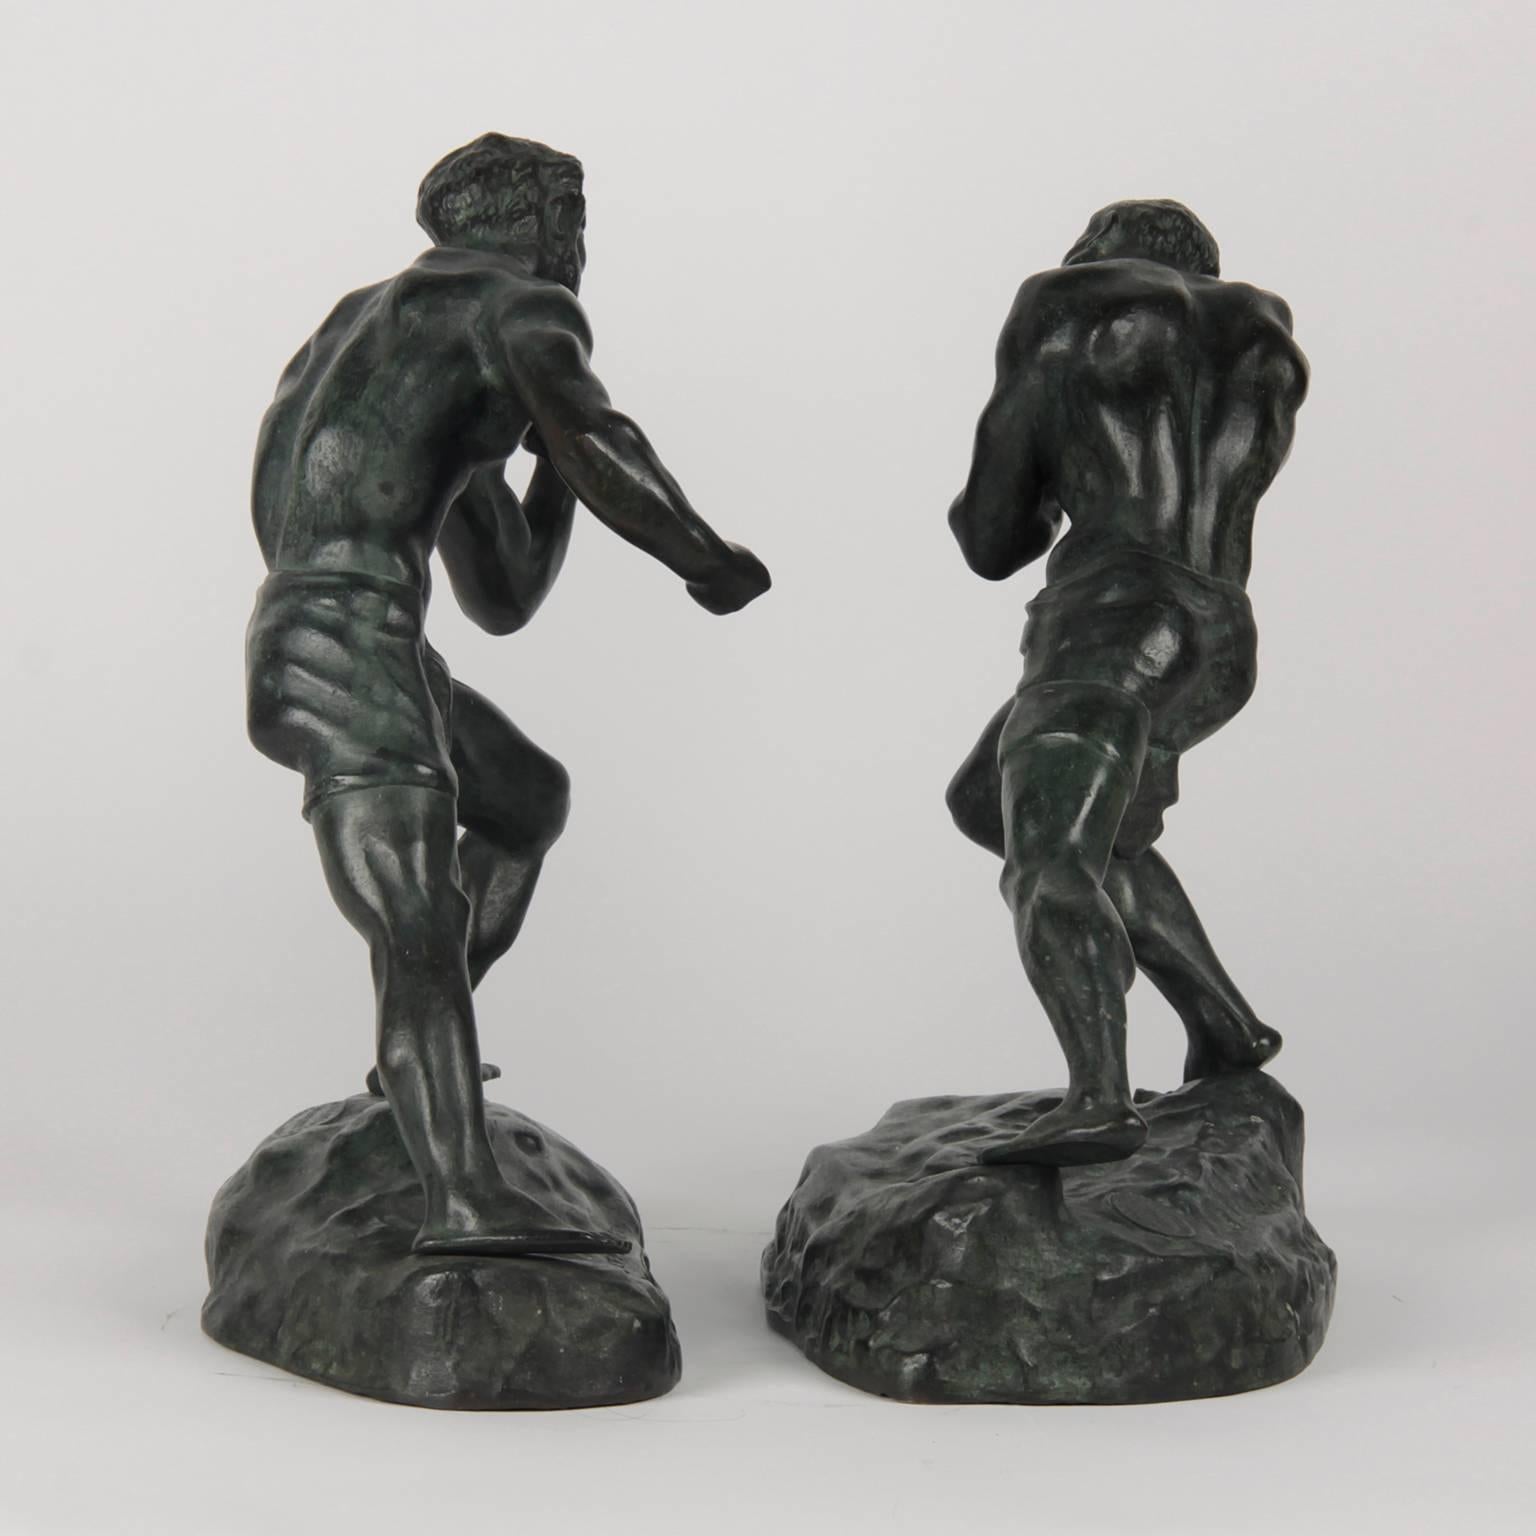 Belgian 19th Century Bronze Pair of Two Boxing Figures, Signed by Jef Lambeaux